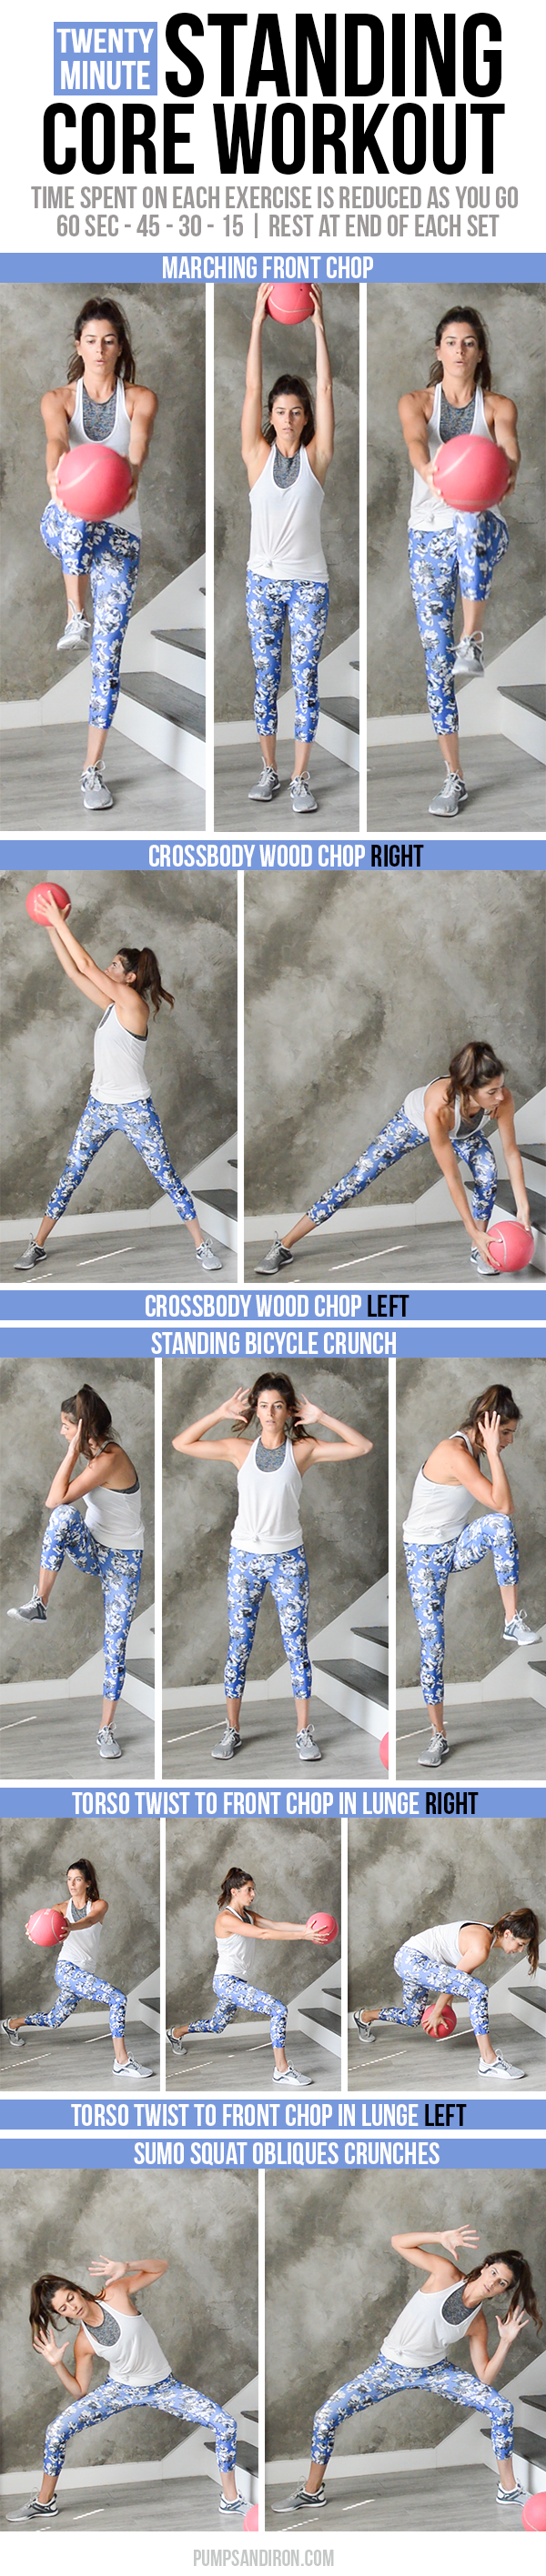 Standing Core Workout - this 20-minute workout will challenge your core stability with standing ab exercises (follow-along video included!)